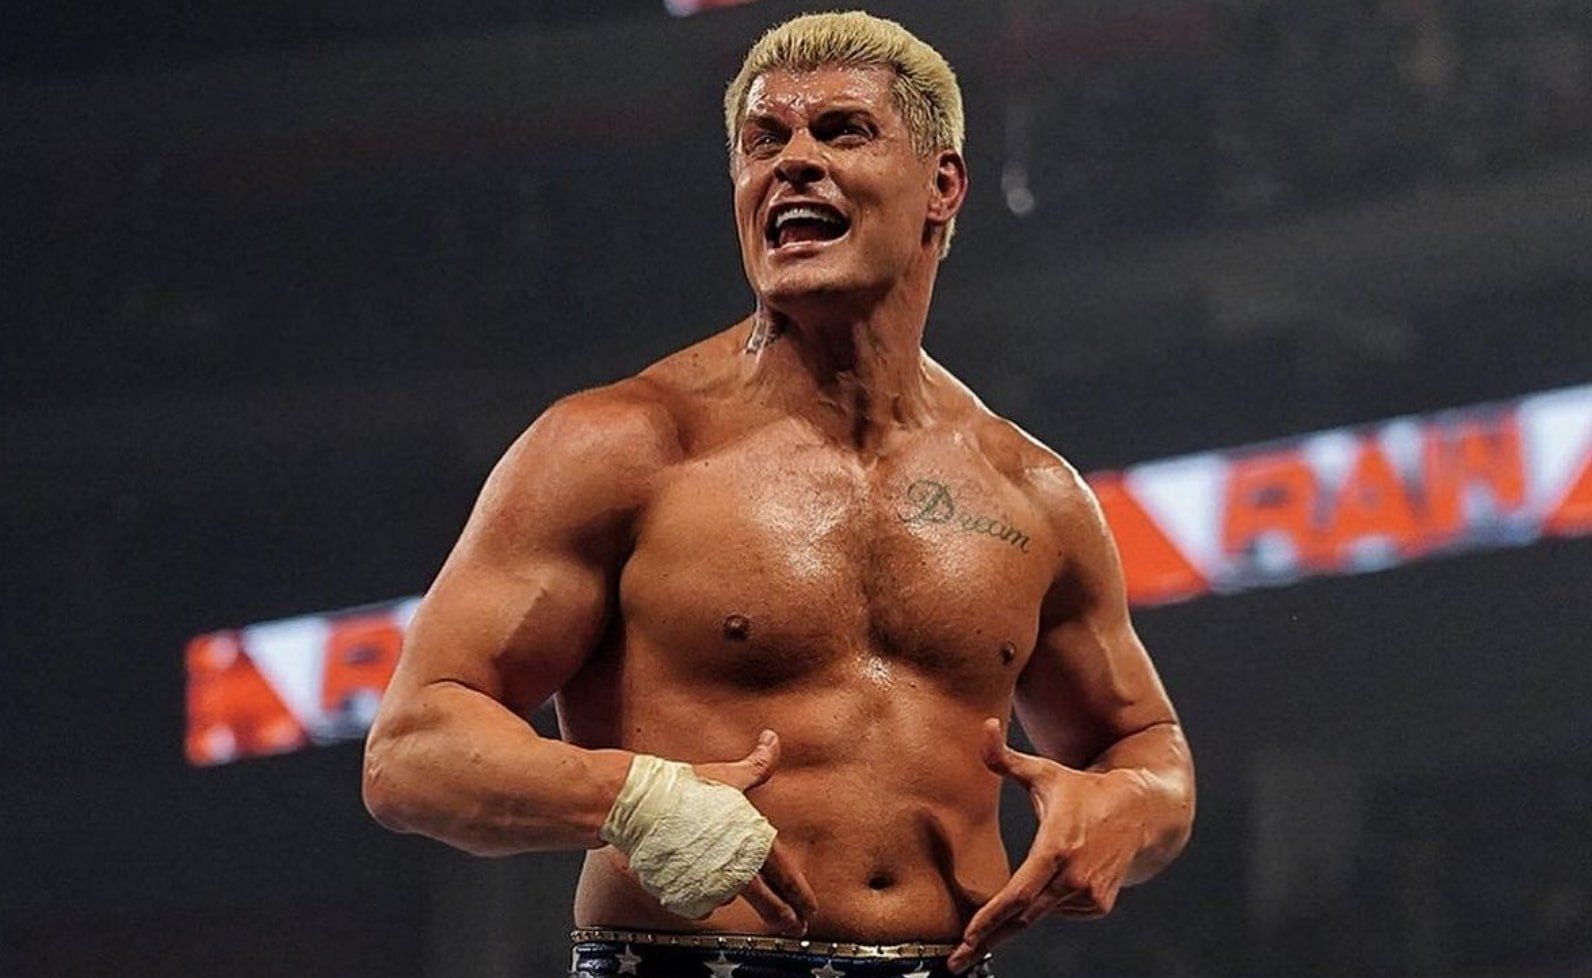 Cody Rhodes competed with a nasty injury at Hell in a Cell